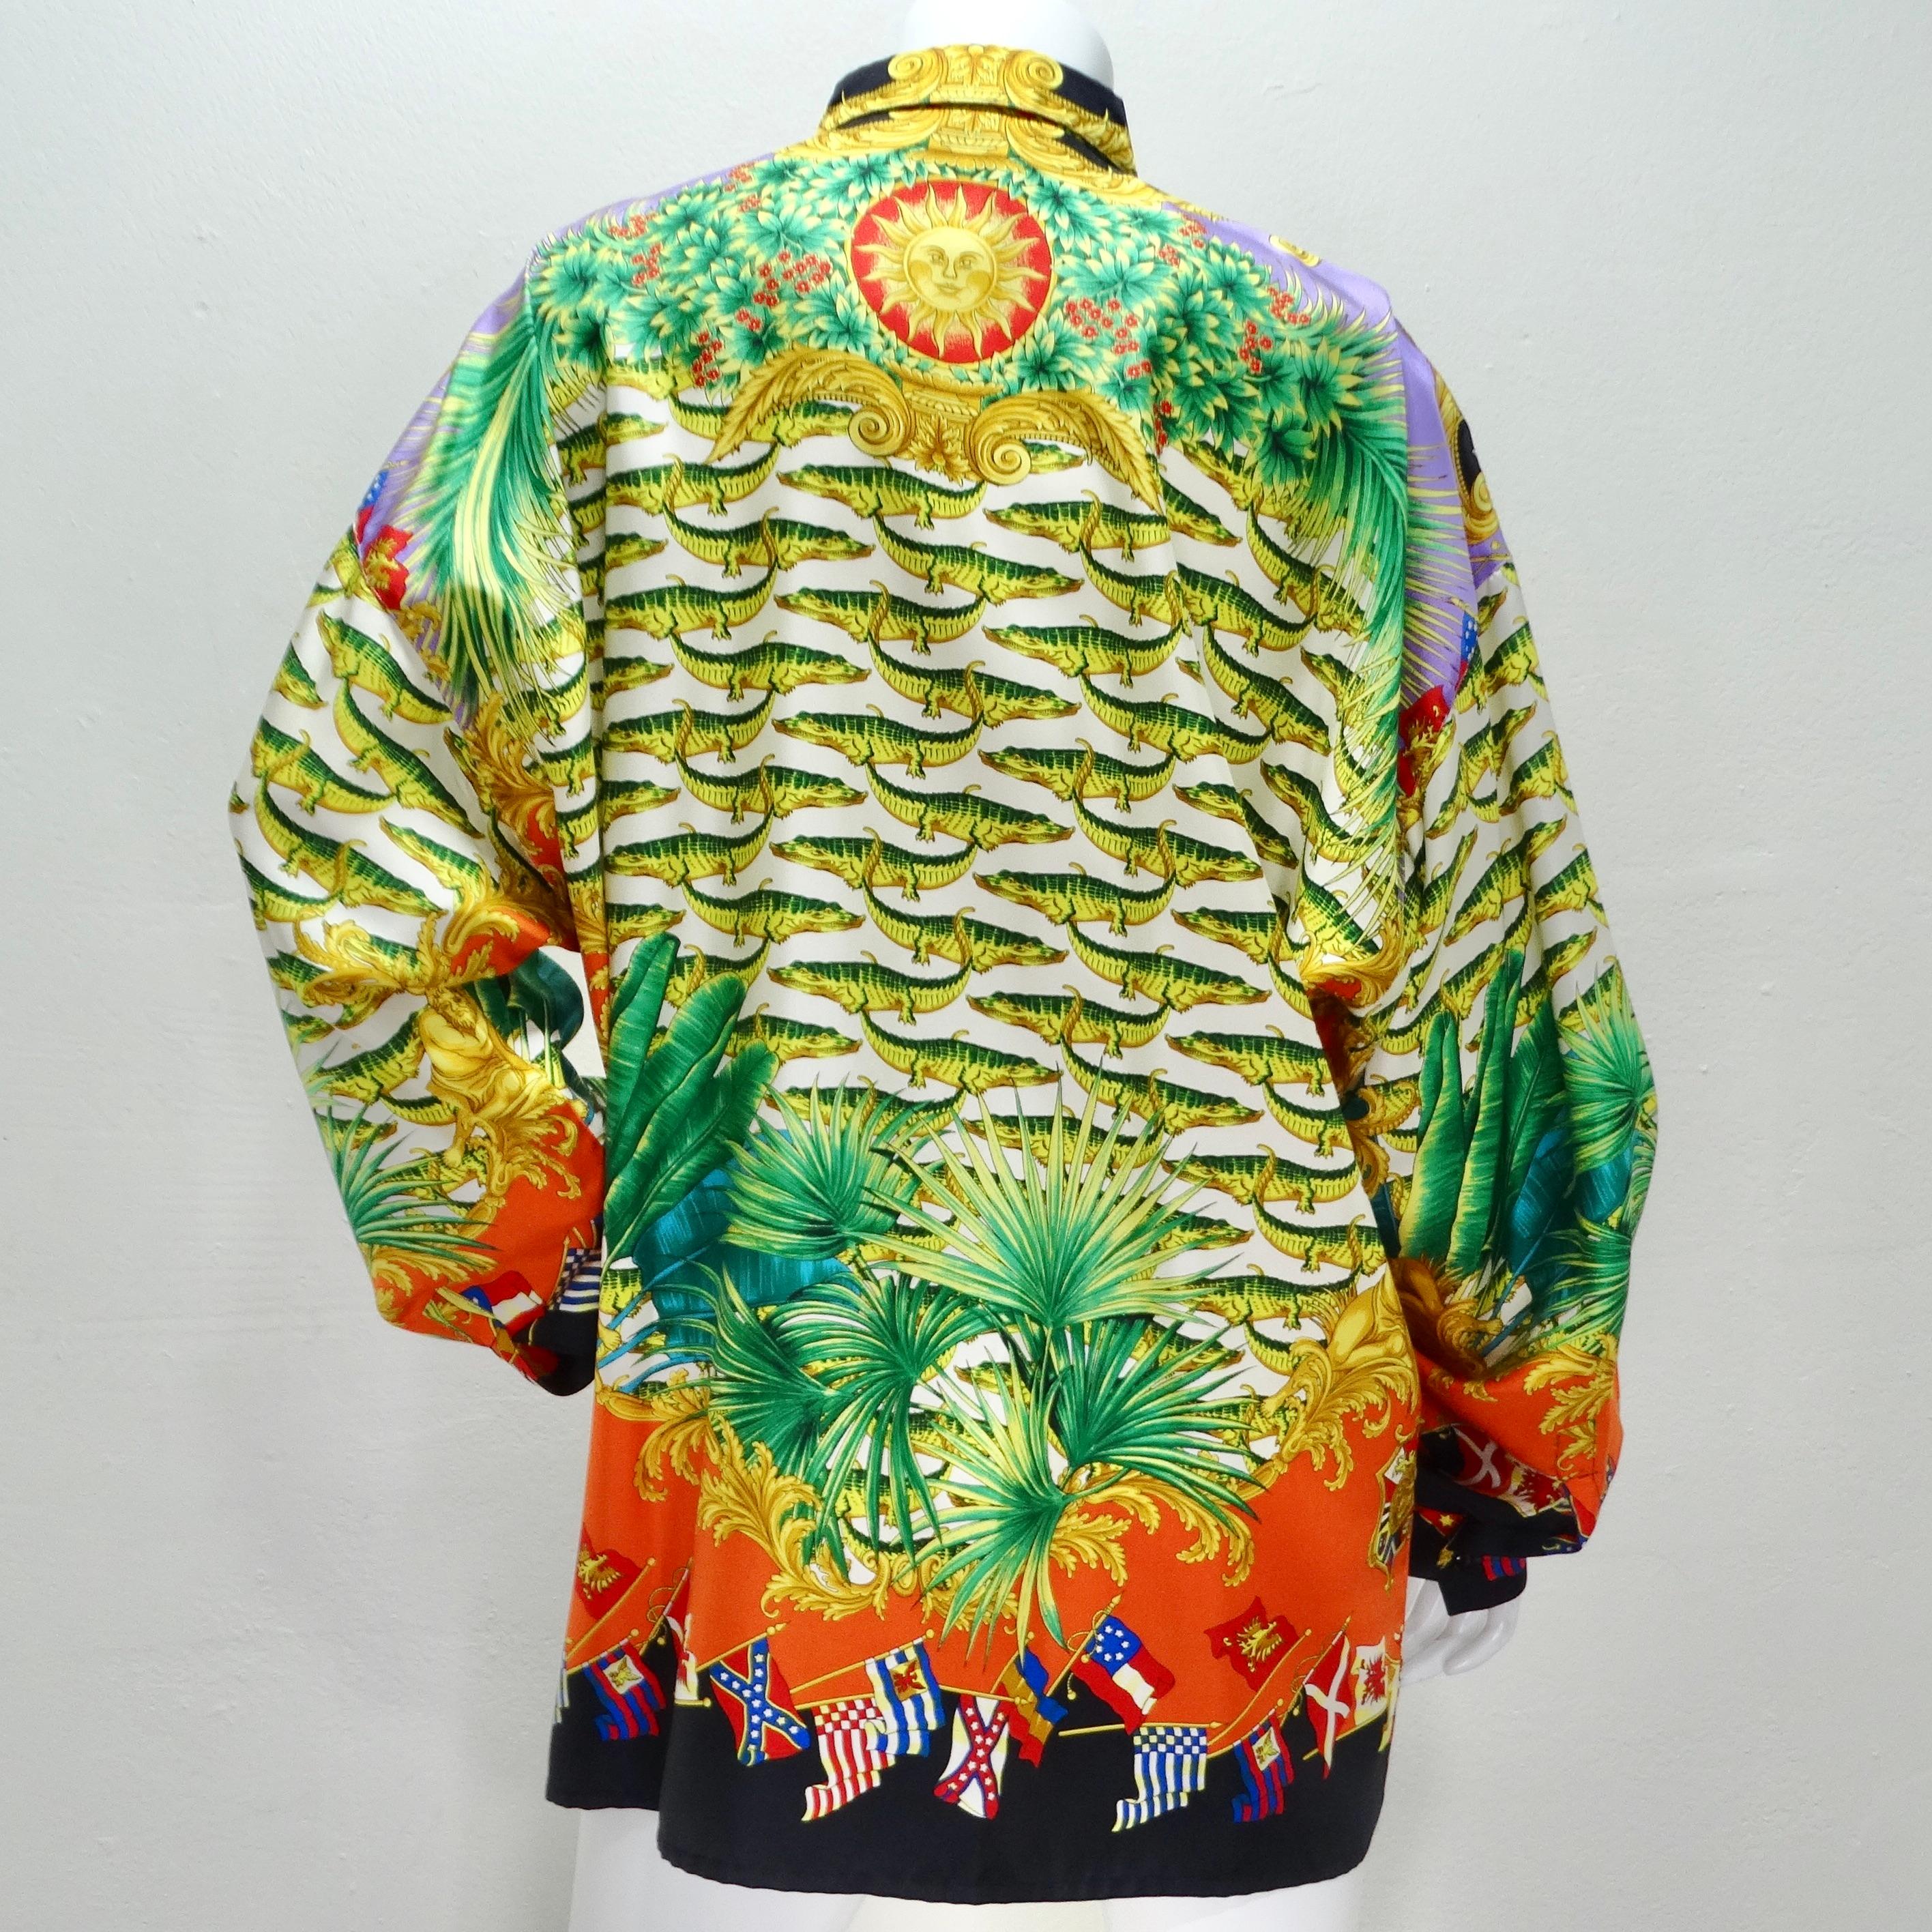 Gianna Versace SS 1993 Miami Collection Silk Shirt For Sale 4